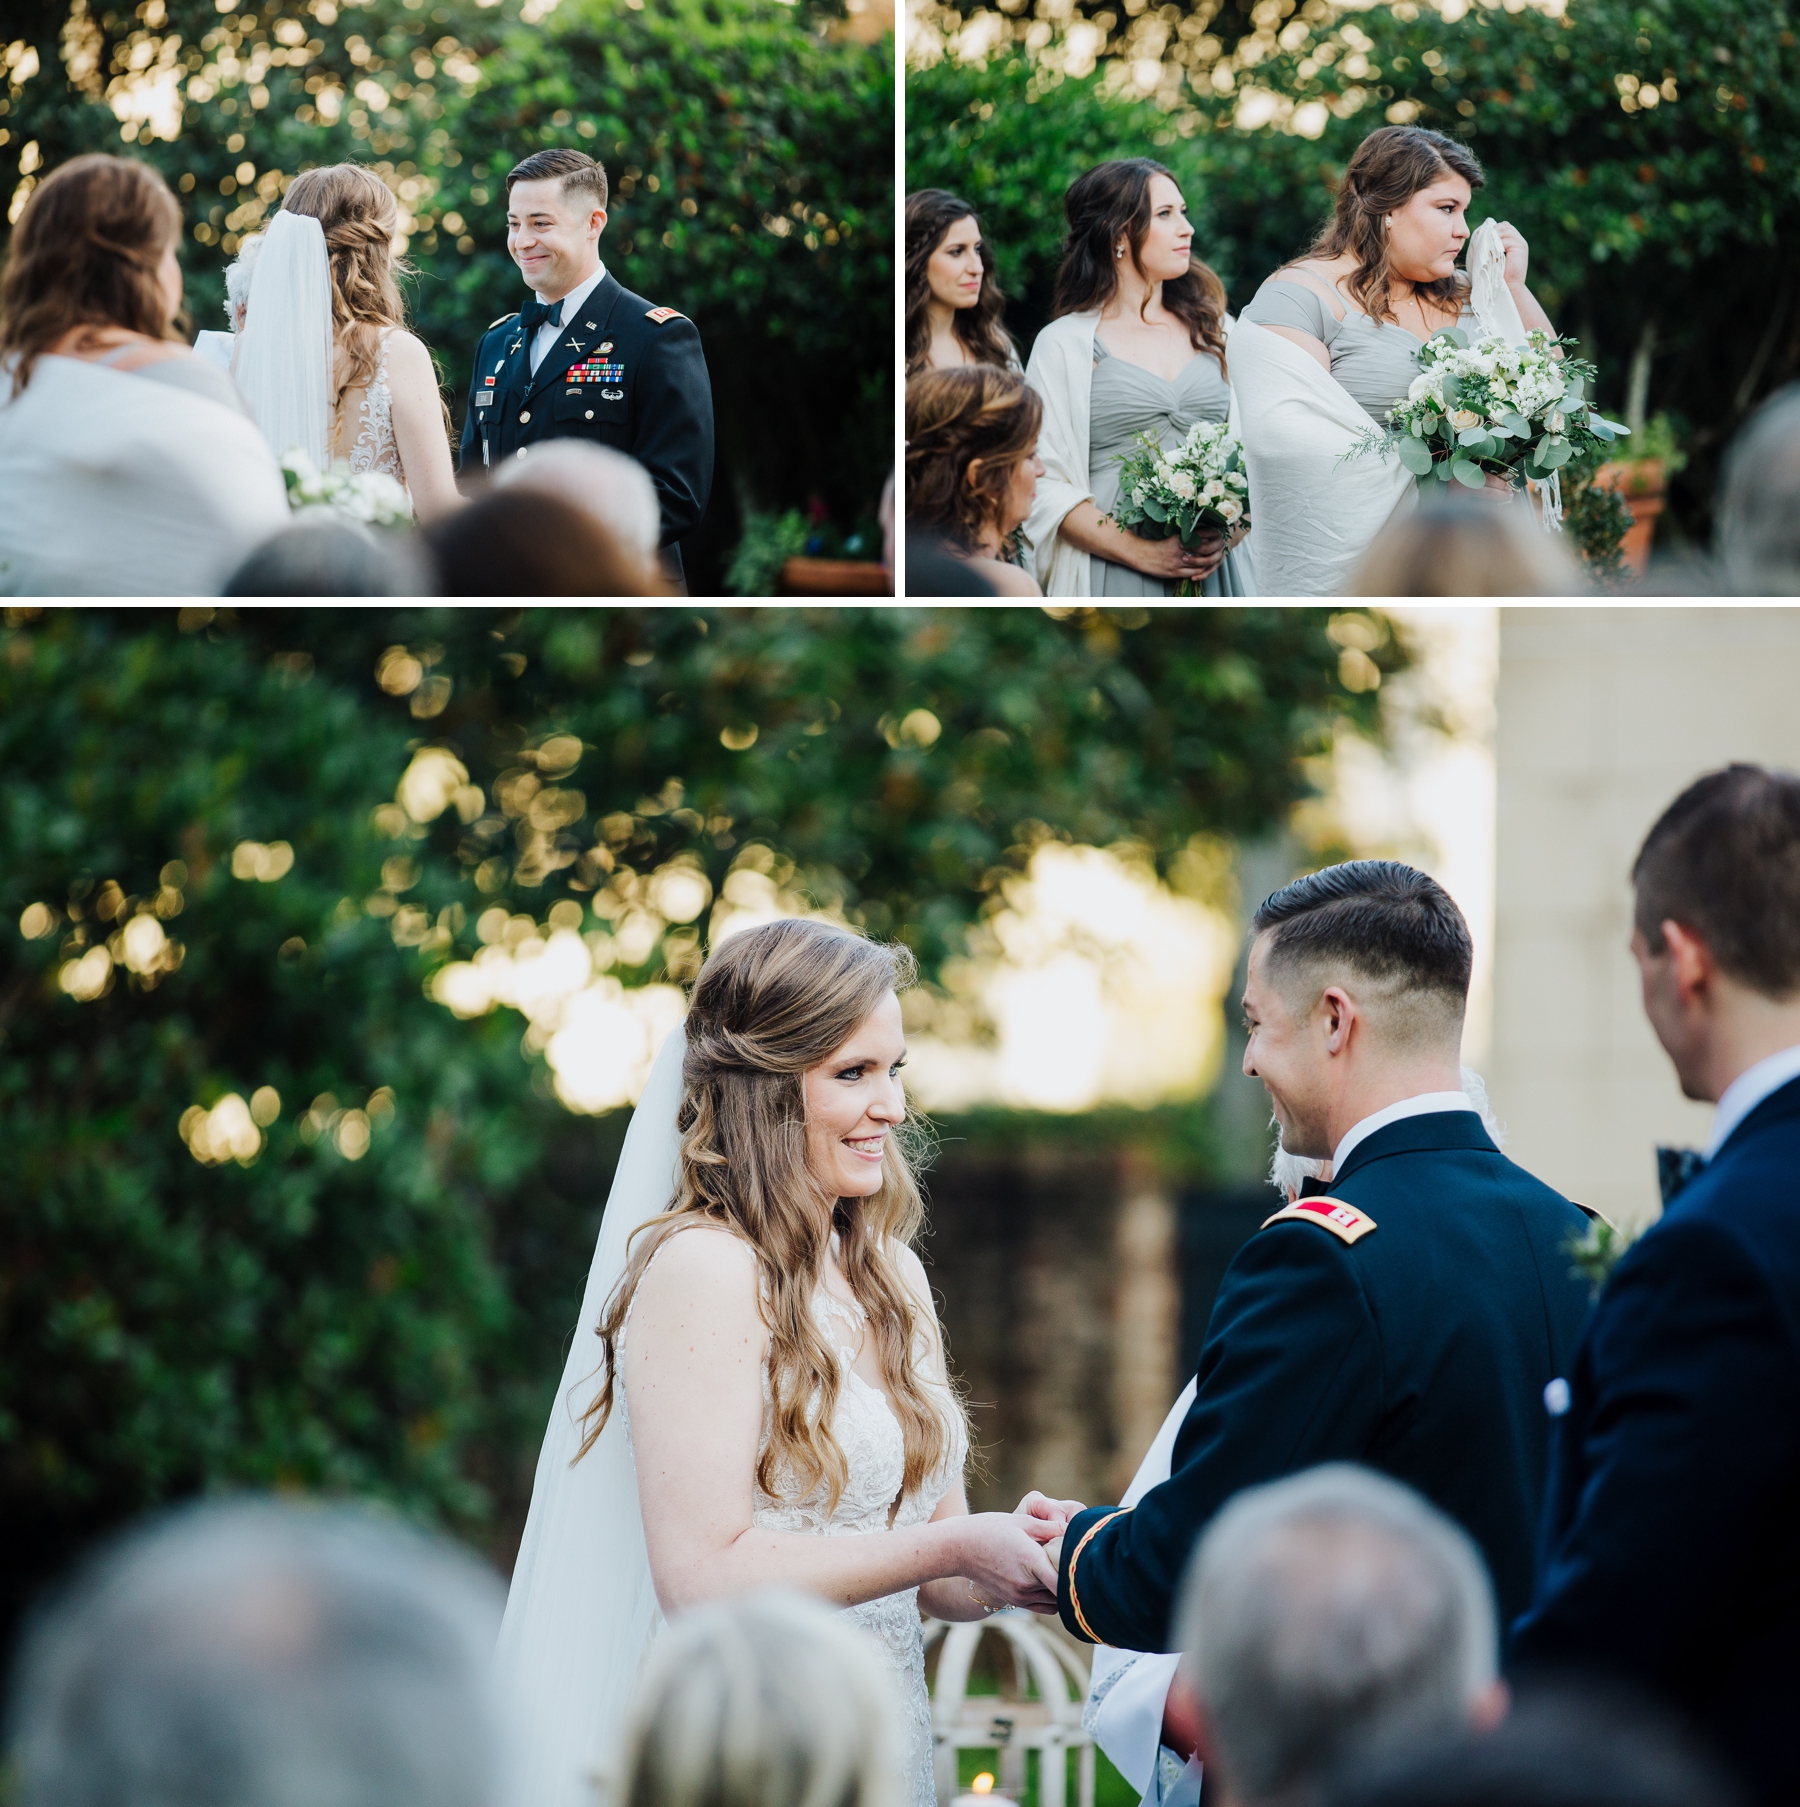 Harper Fowlkes House wedding by Izzy Hudgins Photography